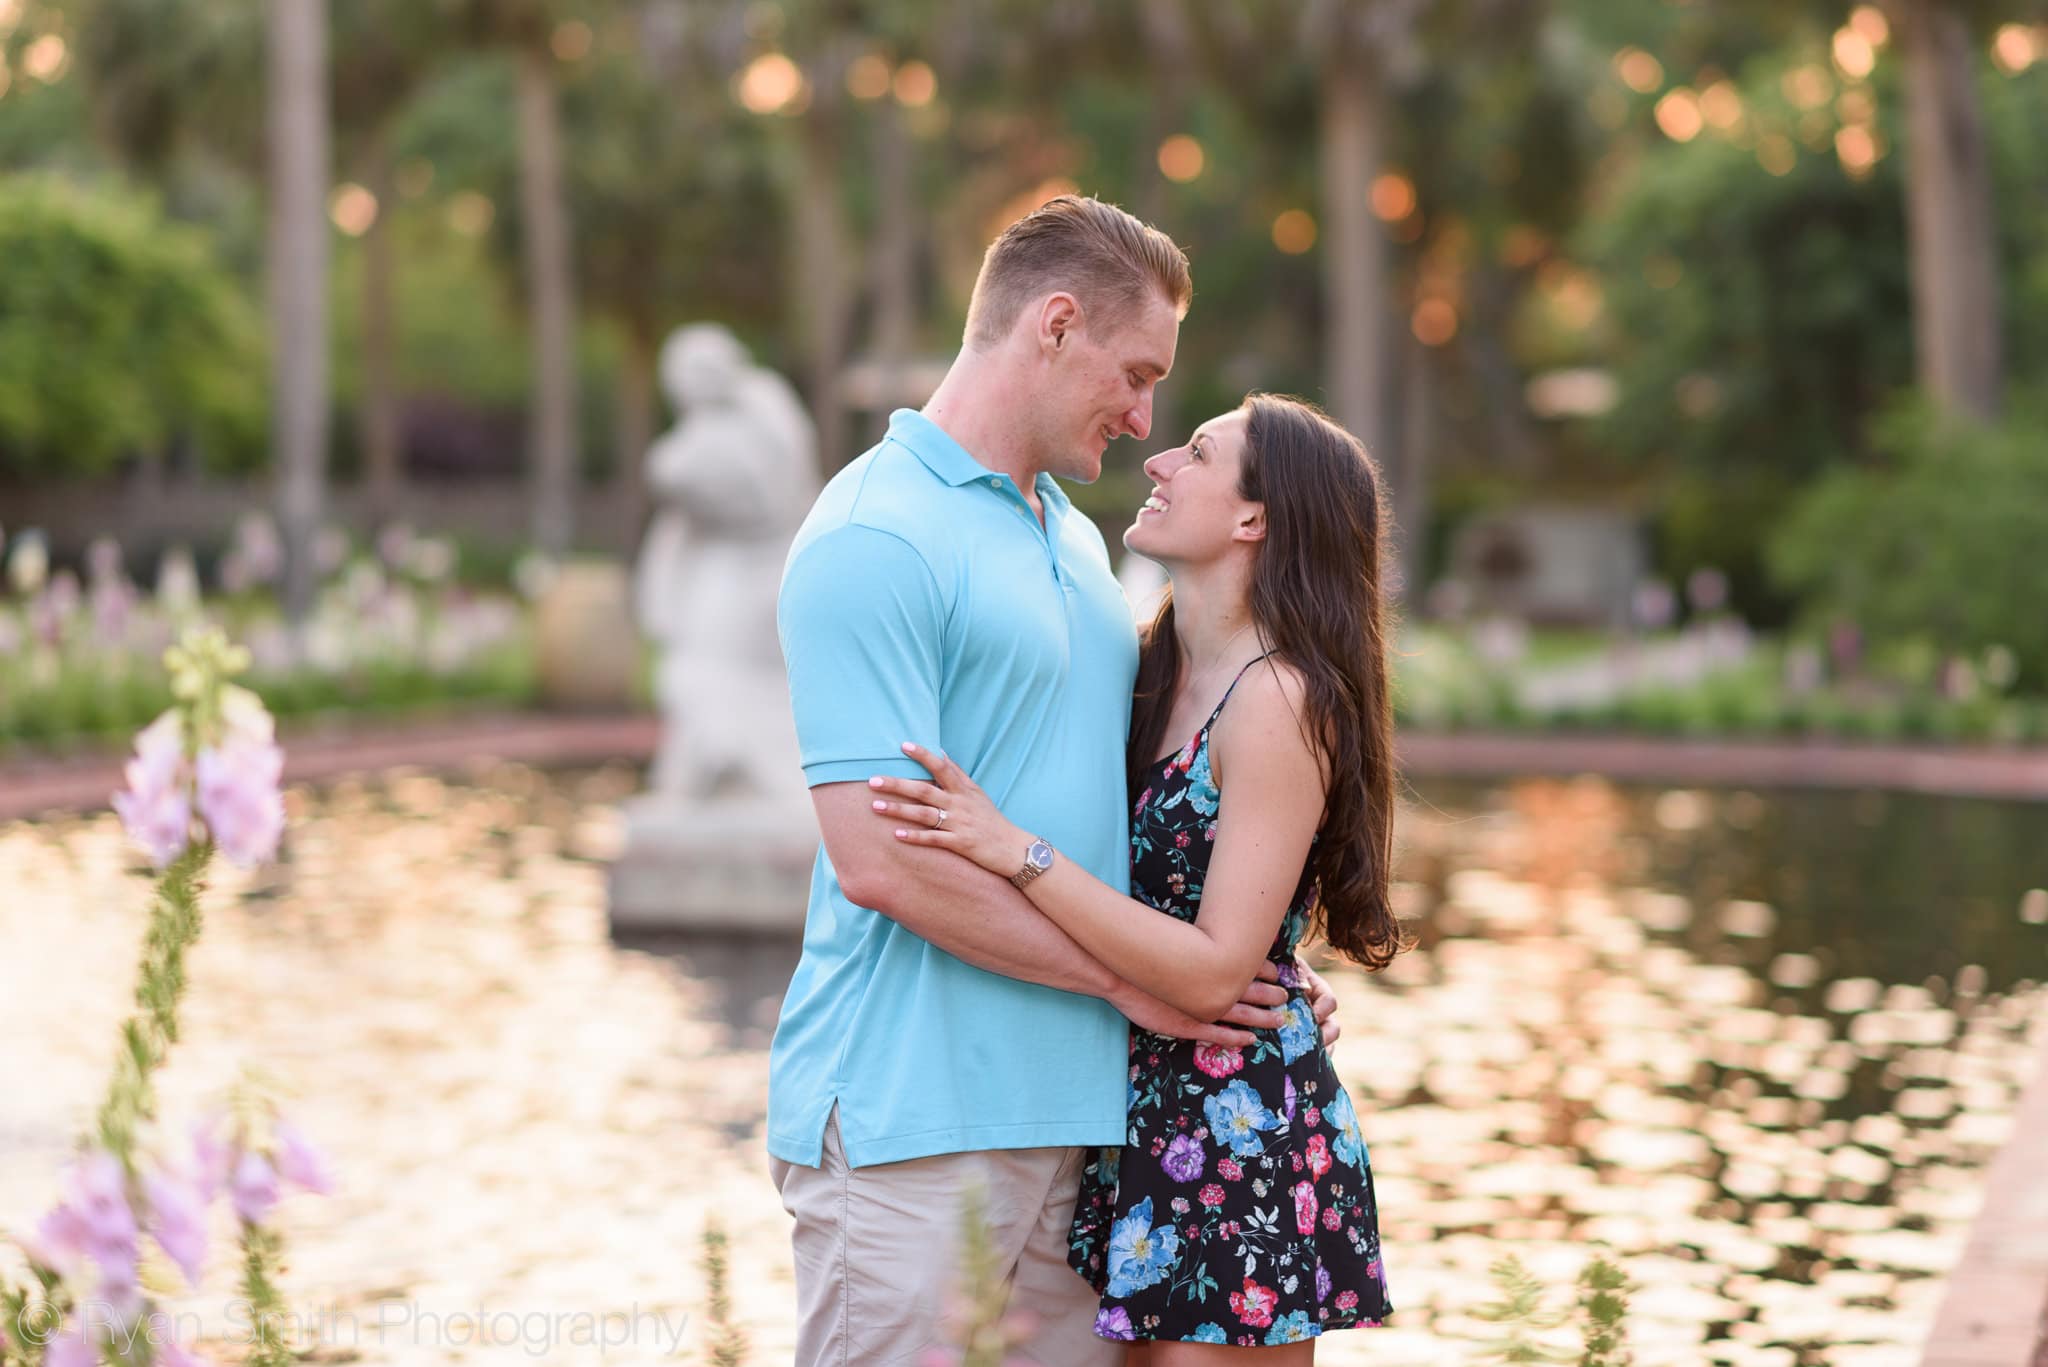 Smiling at each other in the Palmetto Garden - Brookgreen Gardens